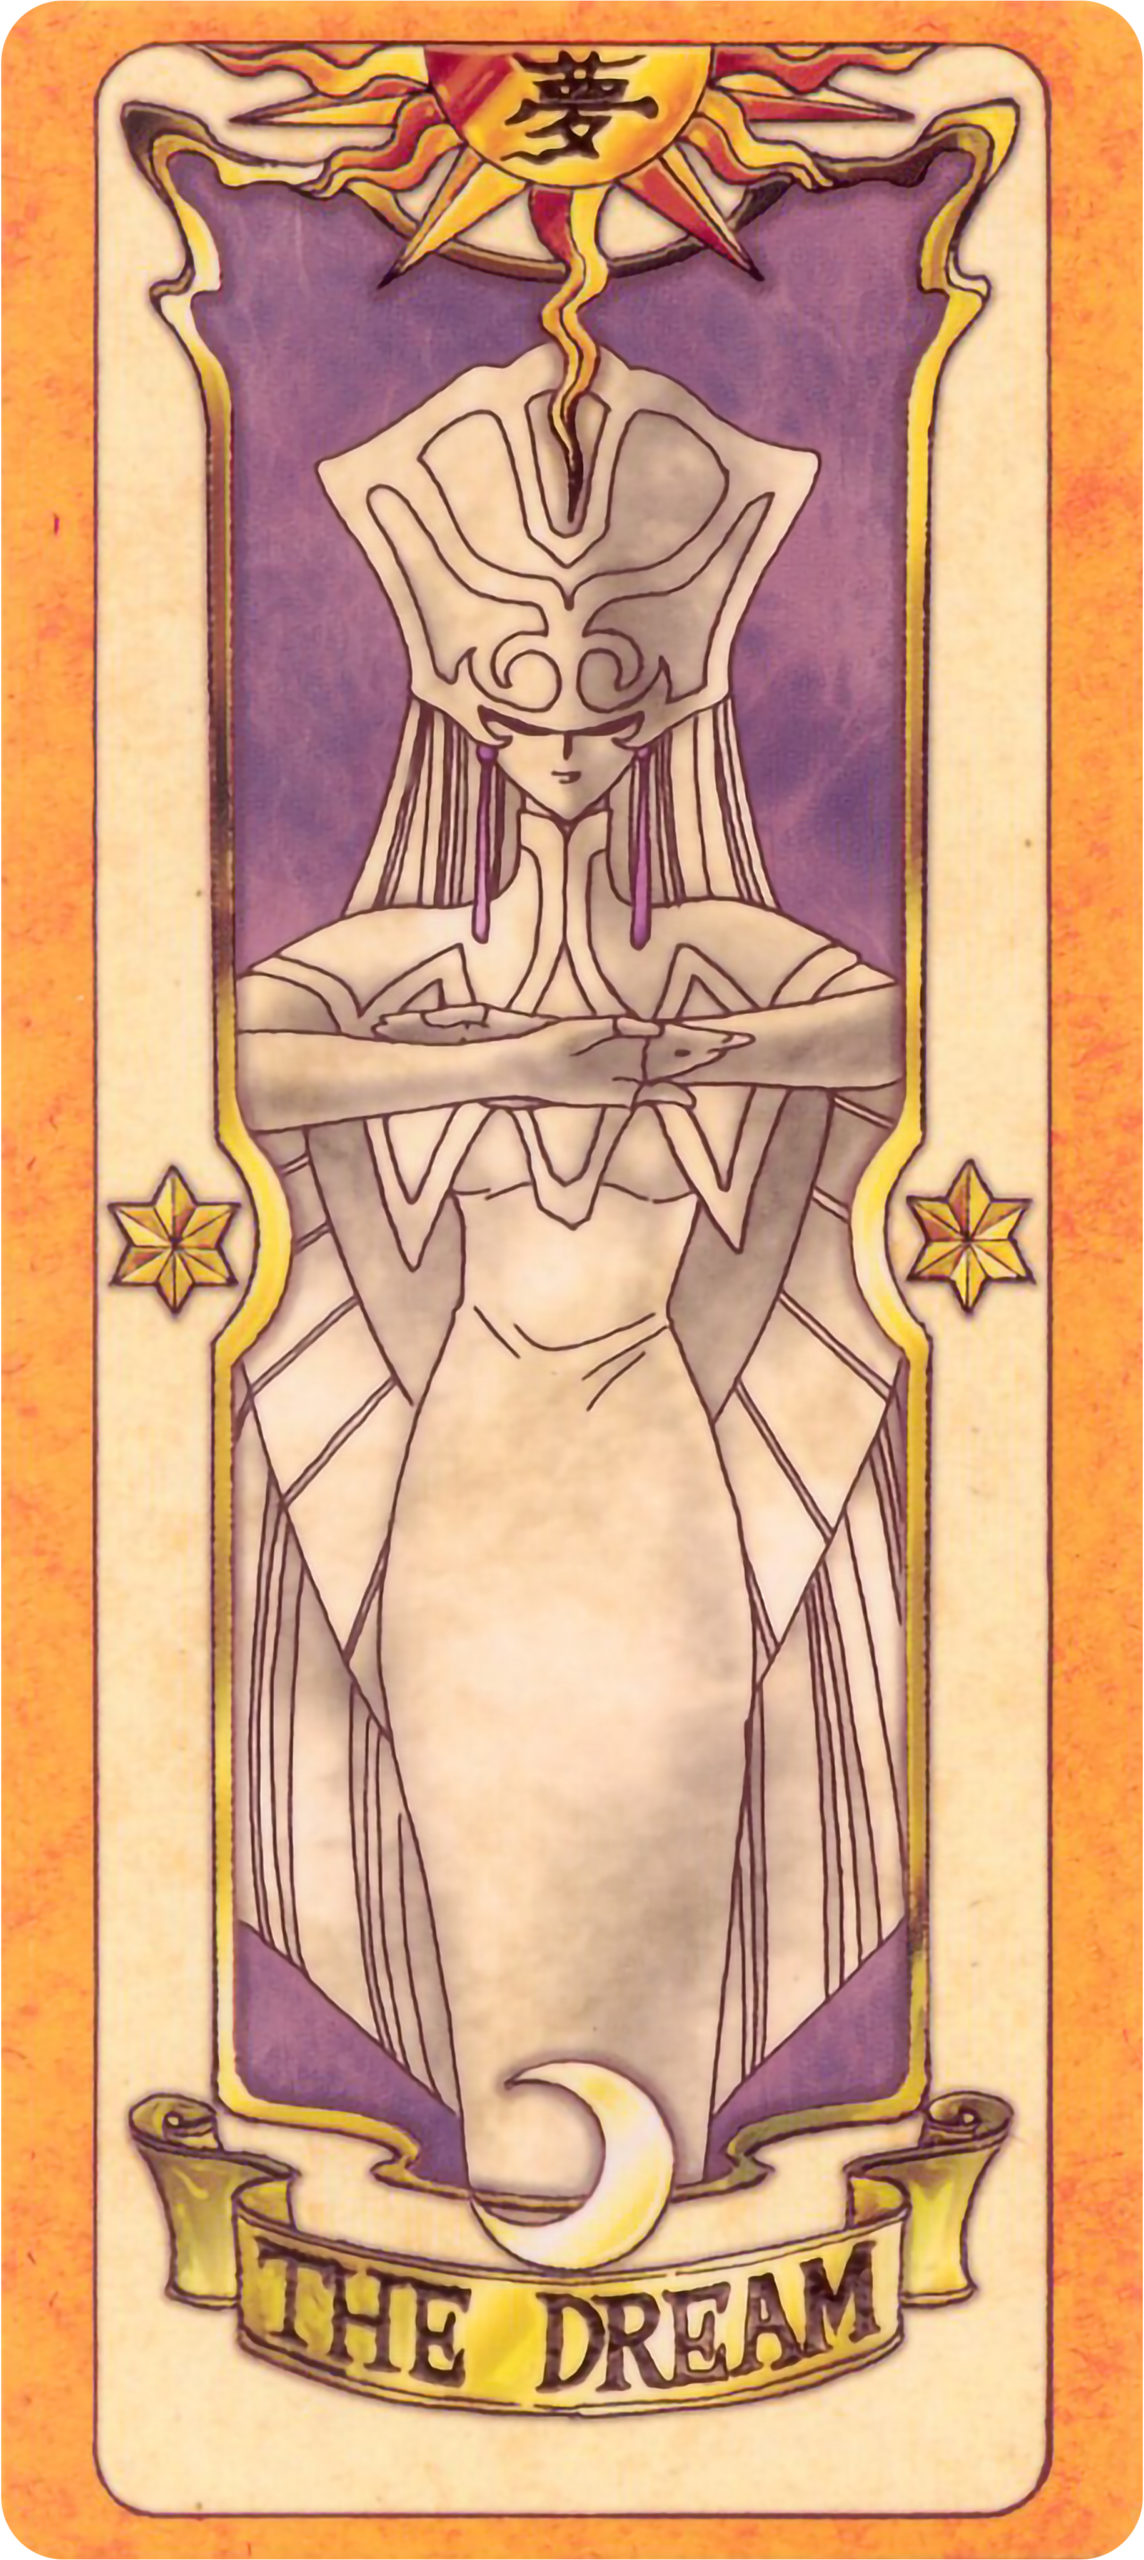 The Dream Clow Card. (Image: CLAMP)